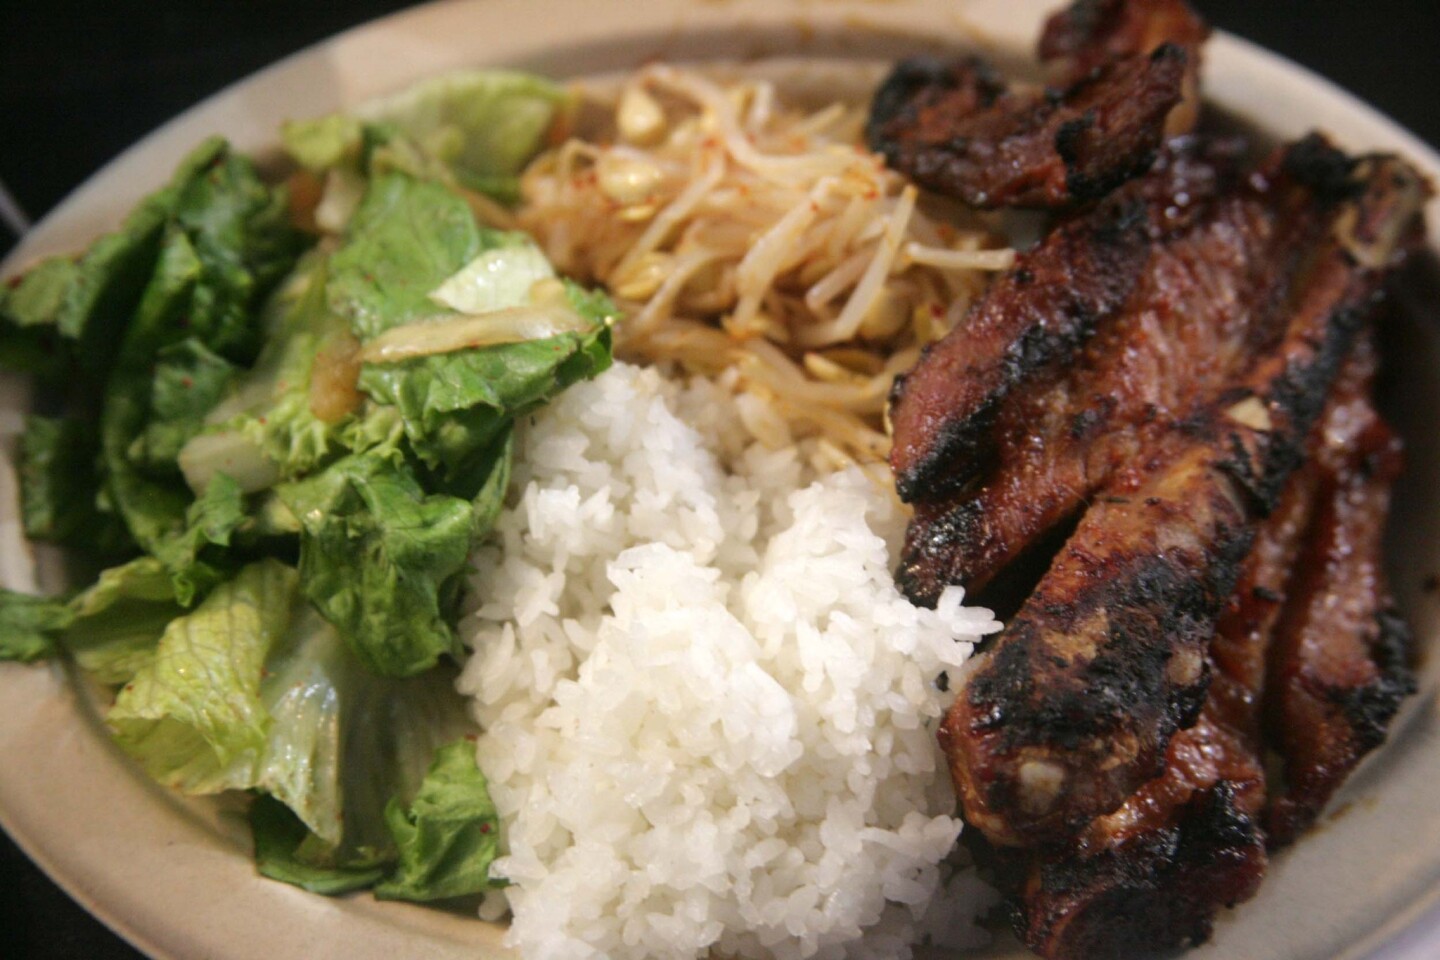 Char-grilled pork ribs, rice, salad and bean sprouts from Hamjipark.